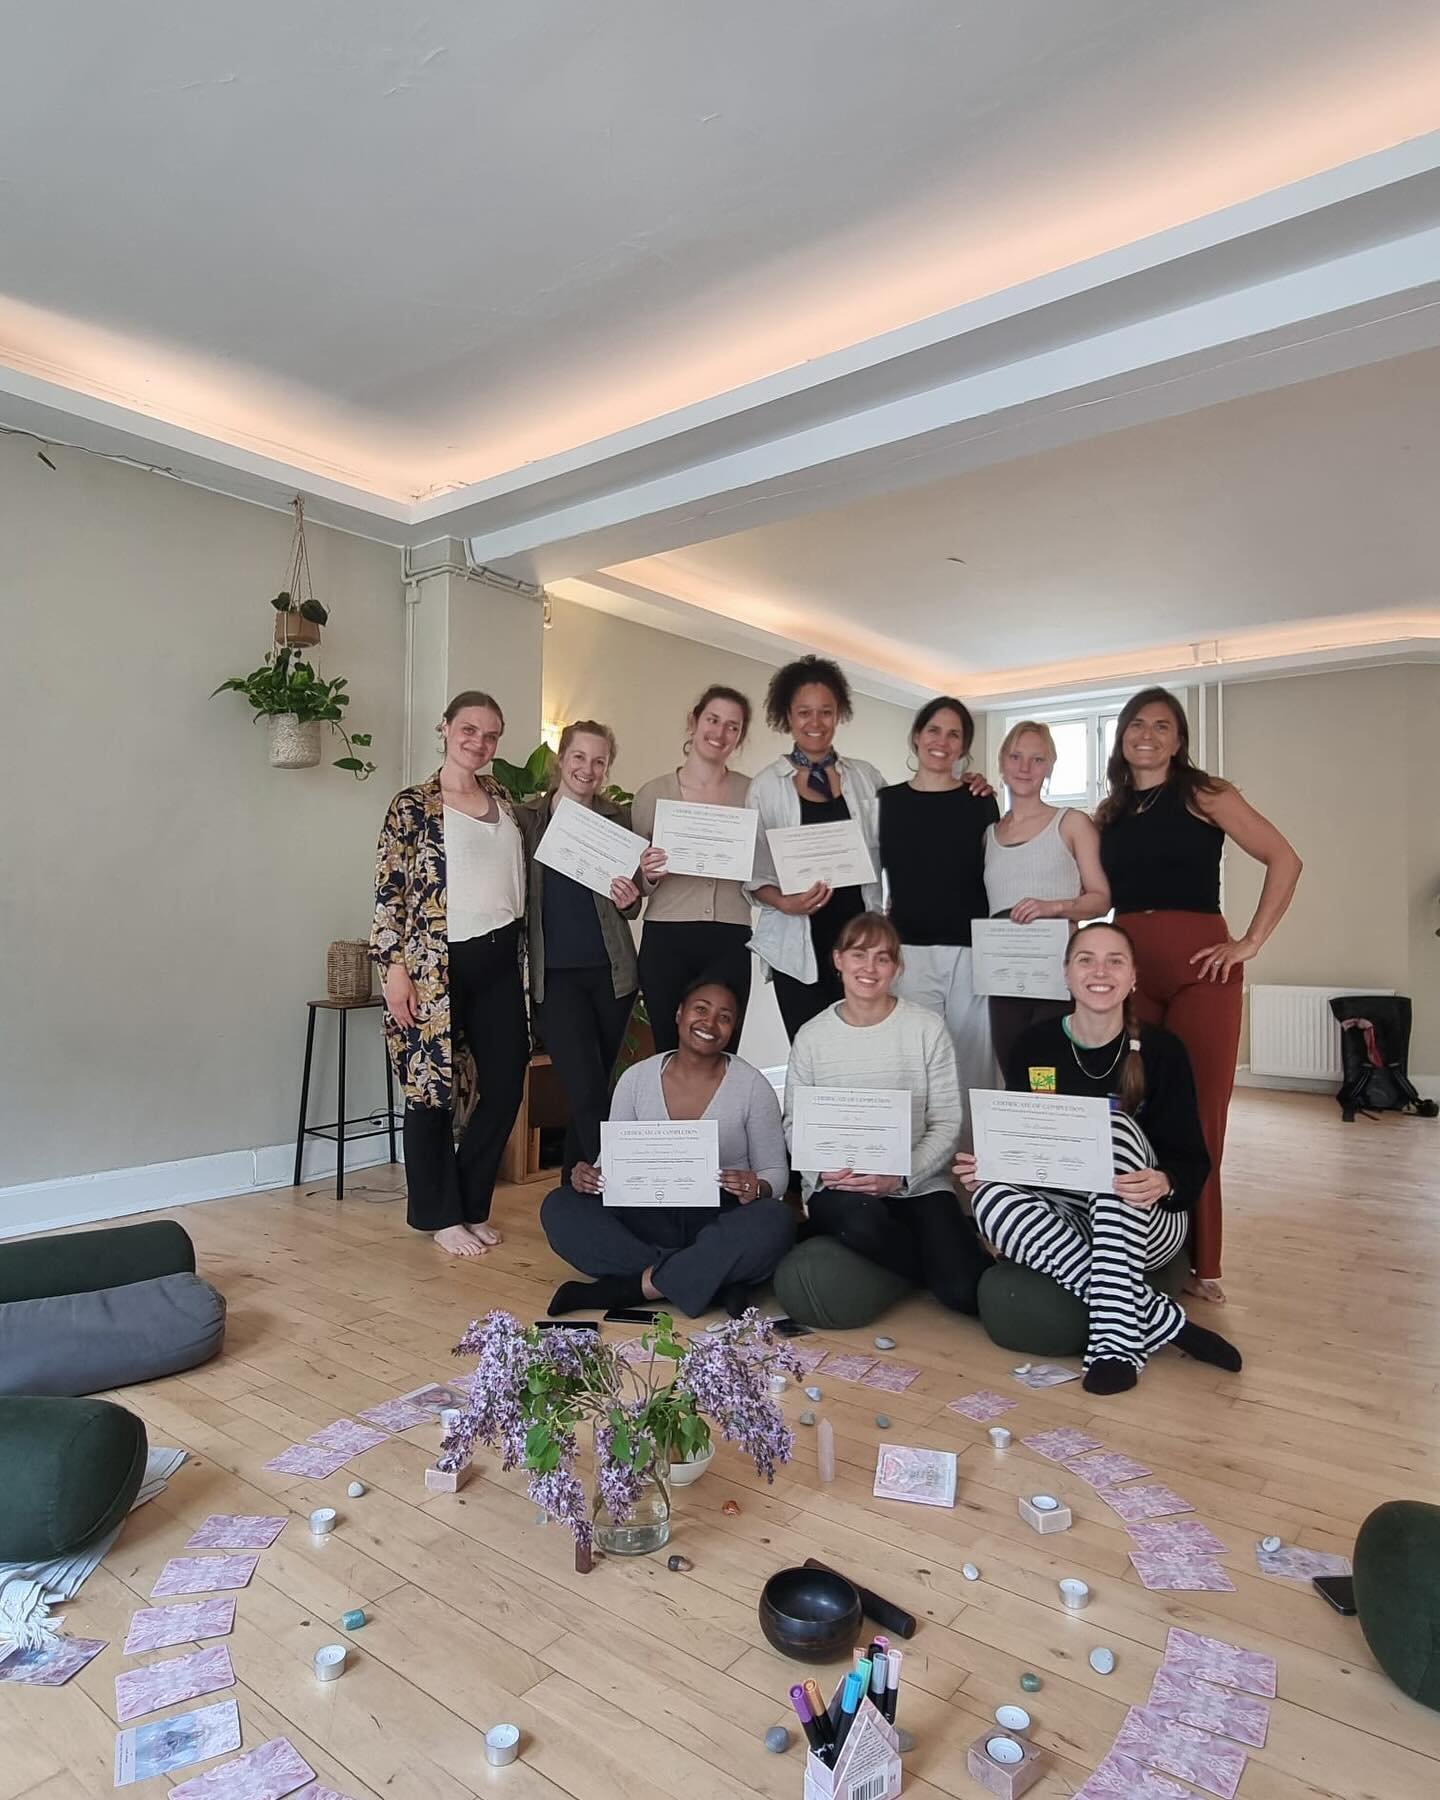 Copenhagen has 7 amazing new pre and post natal yoga teachers!!! 👏 we are just so proud of you all ❤️🥹 
Here&rsquo;s what Fie wrote:
&ldquo;Mathilde, Lauriane, and Leah are amazing teachers! Their training is filled with so much insightful knowledg